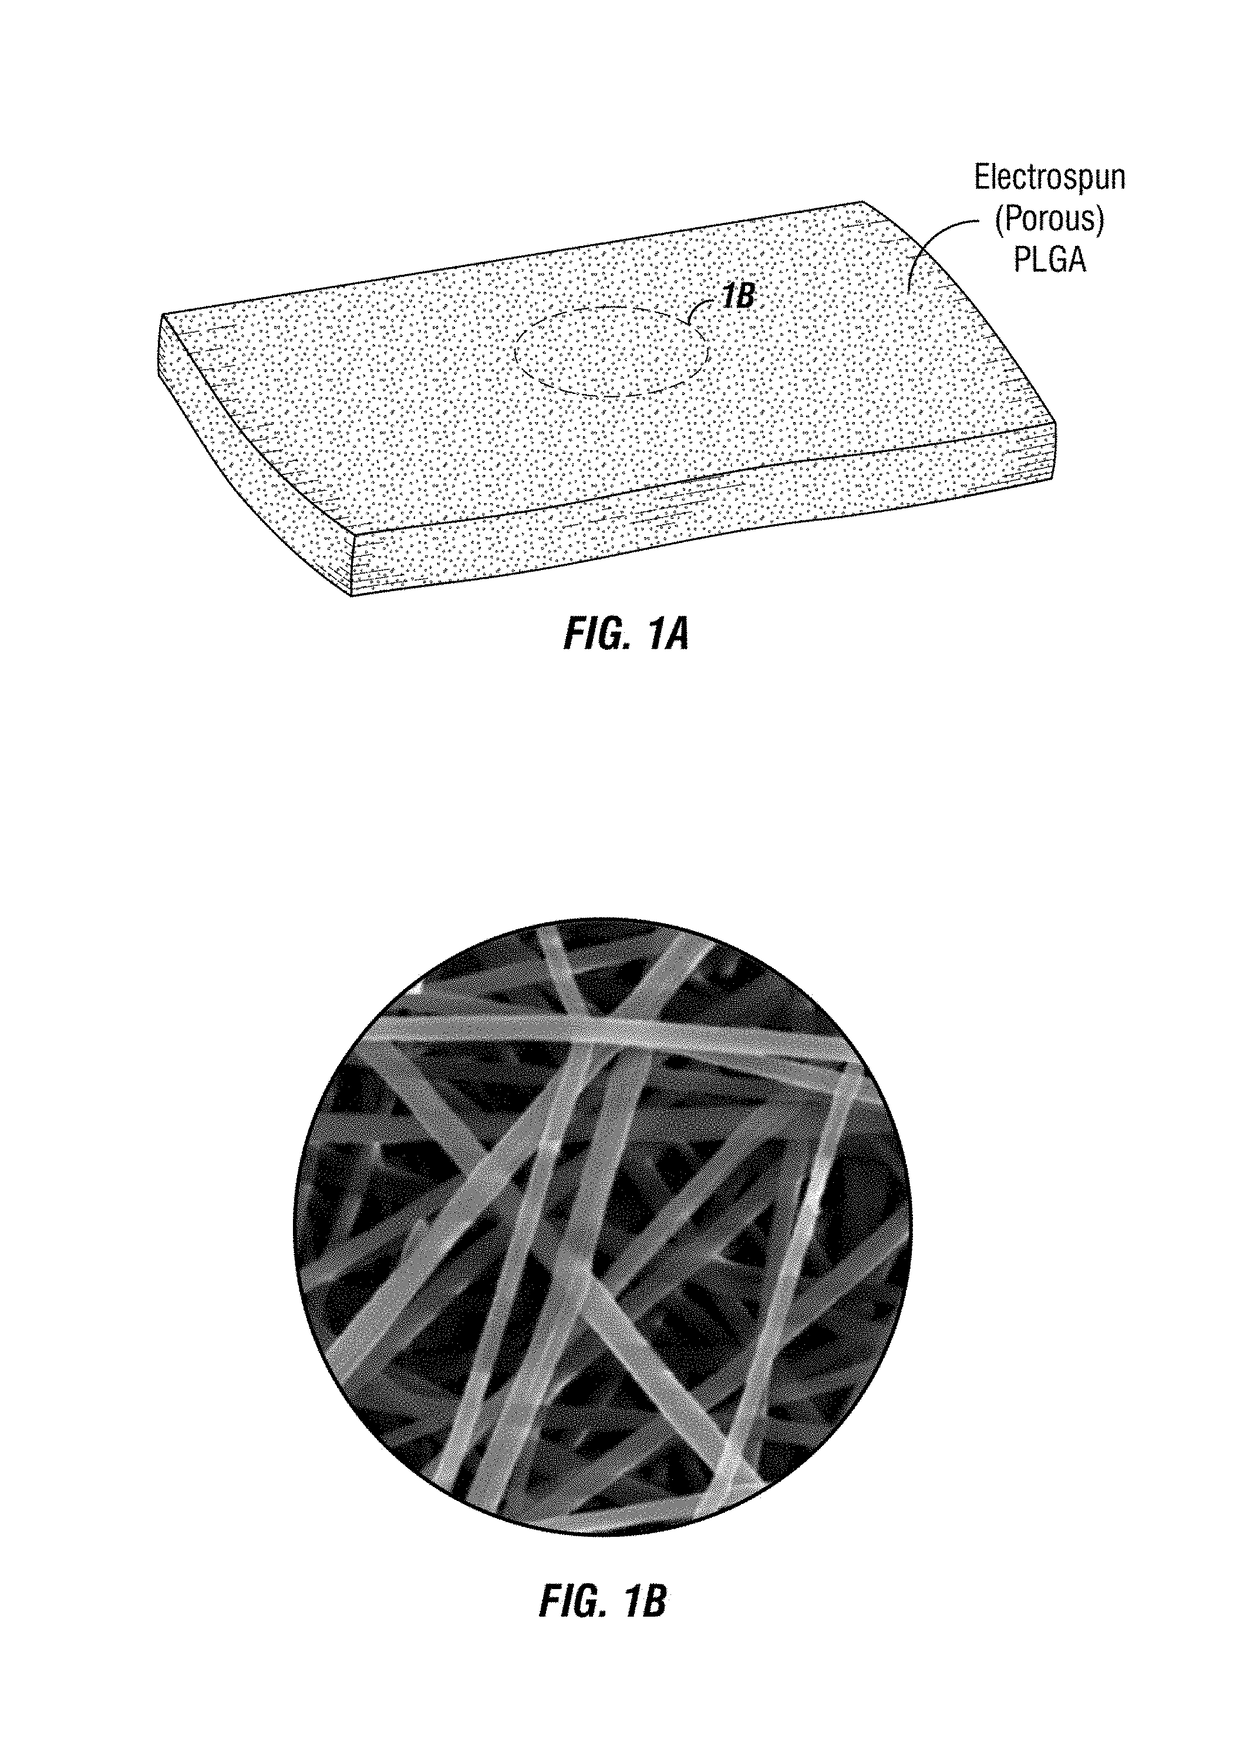 Implantable electrospun patches for site-directed drug delivery